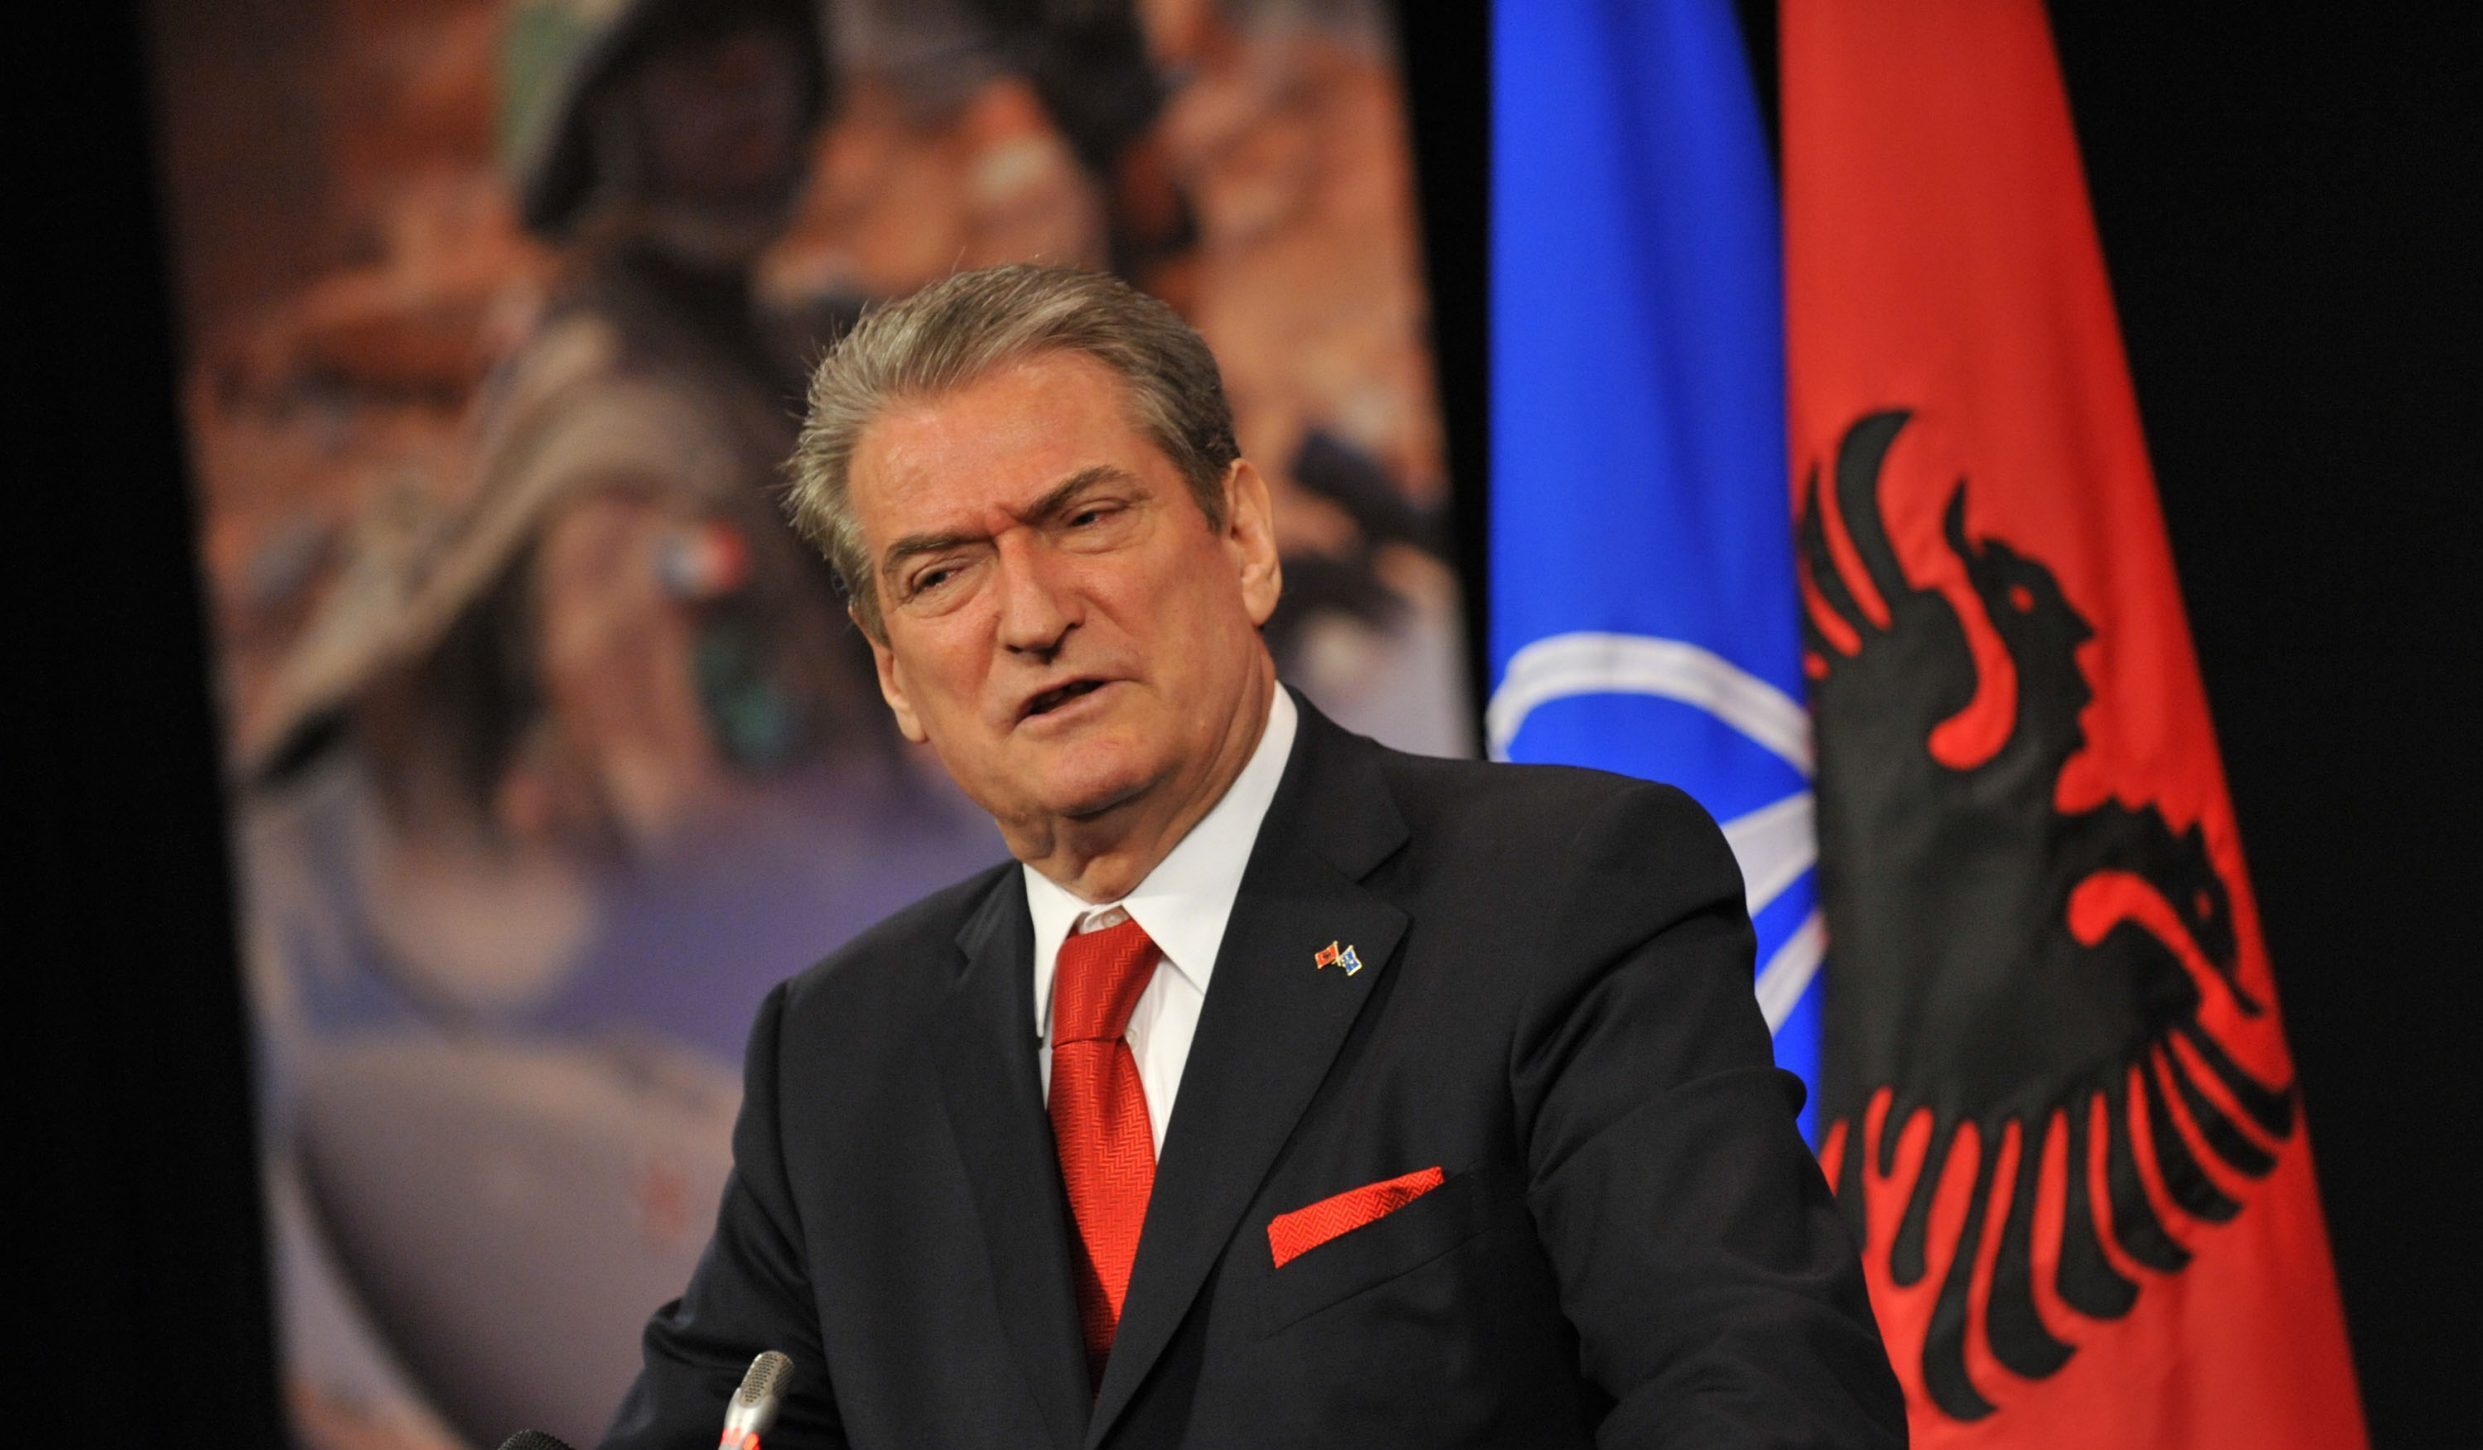 Parliament of Albania strips former PM of immunity